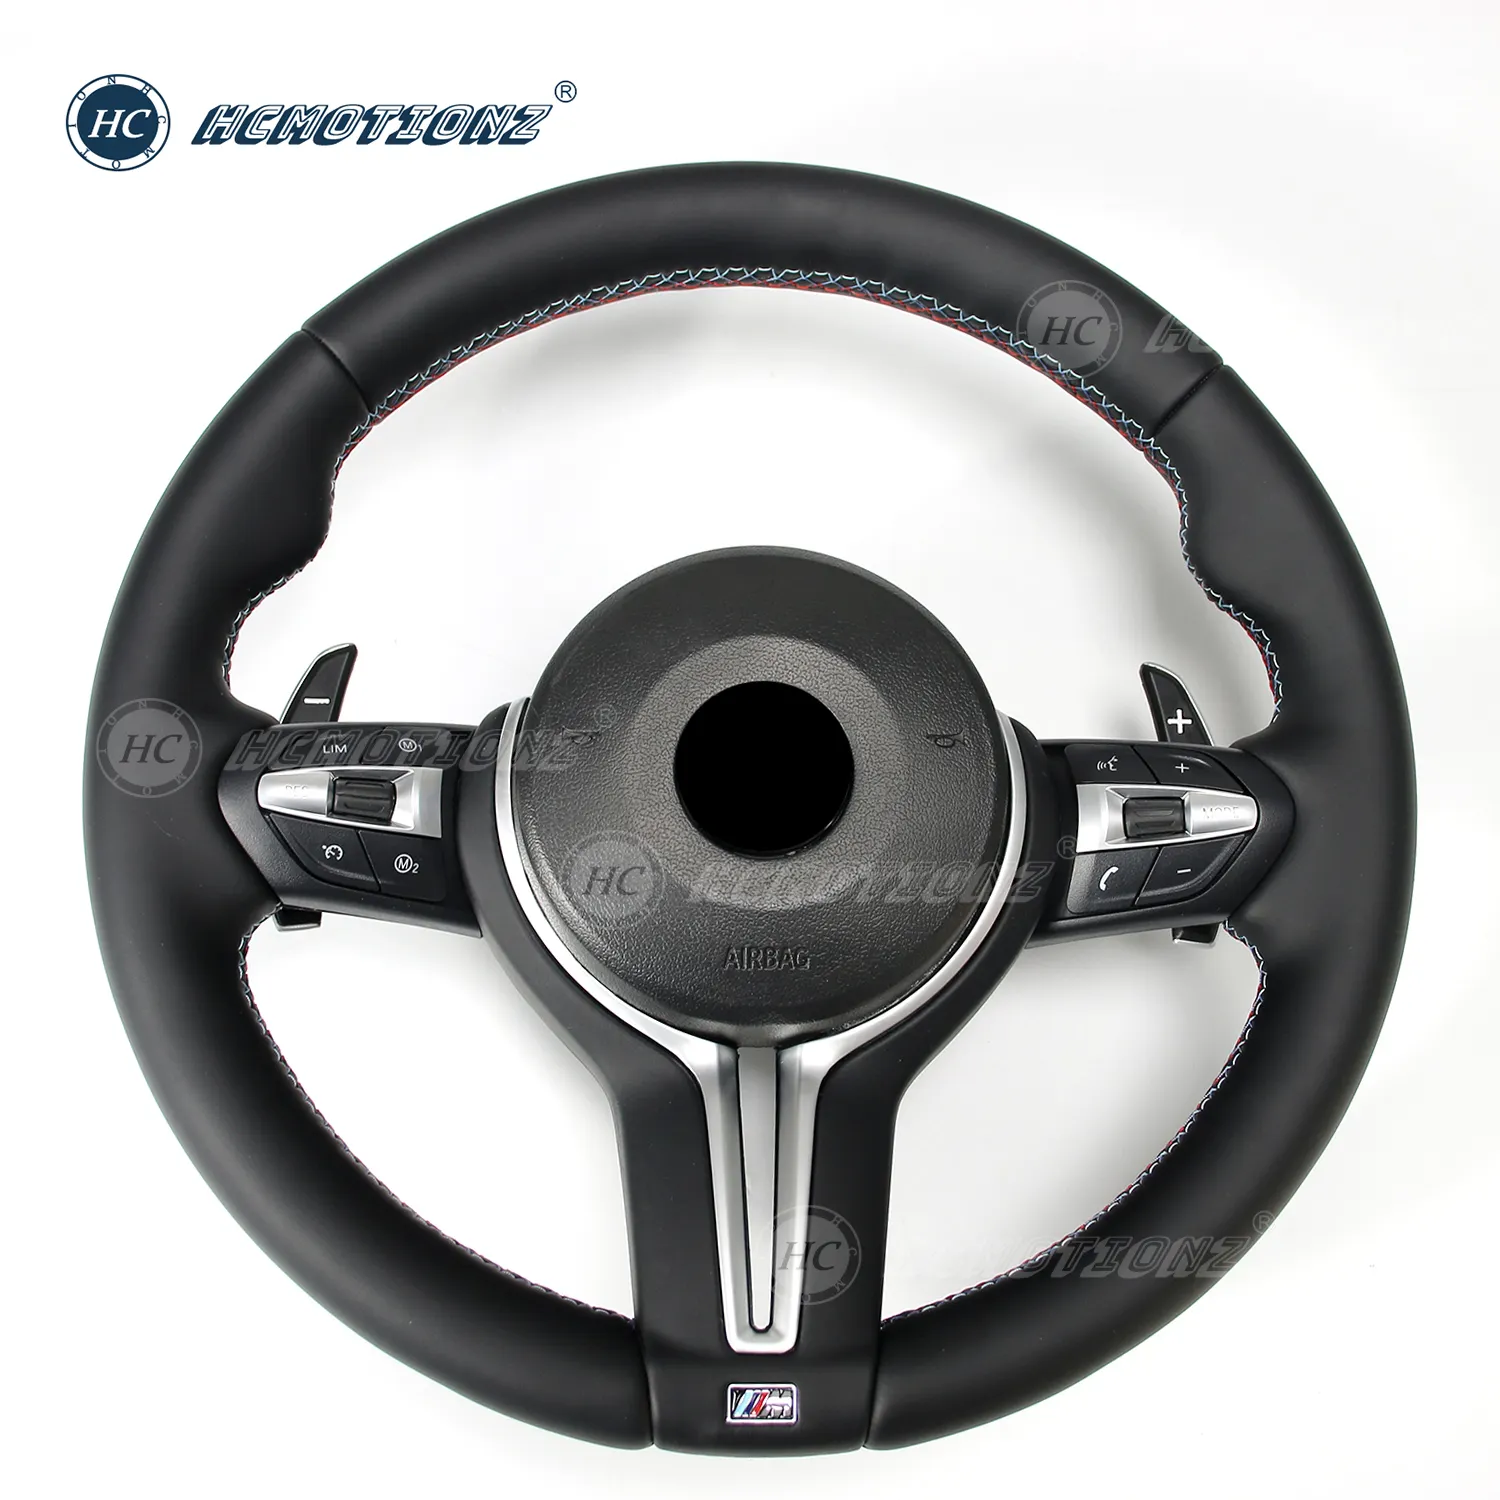 HCMOTIONZ Leather Carbon Fiber Steering Wheel Fit F30 F32 F10 F20 F07 F01 E46 E60 E90 M3 M4 M5 M7 Steering Wheel for BMW